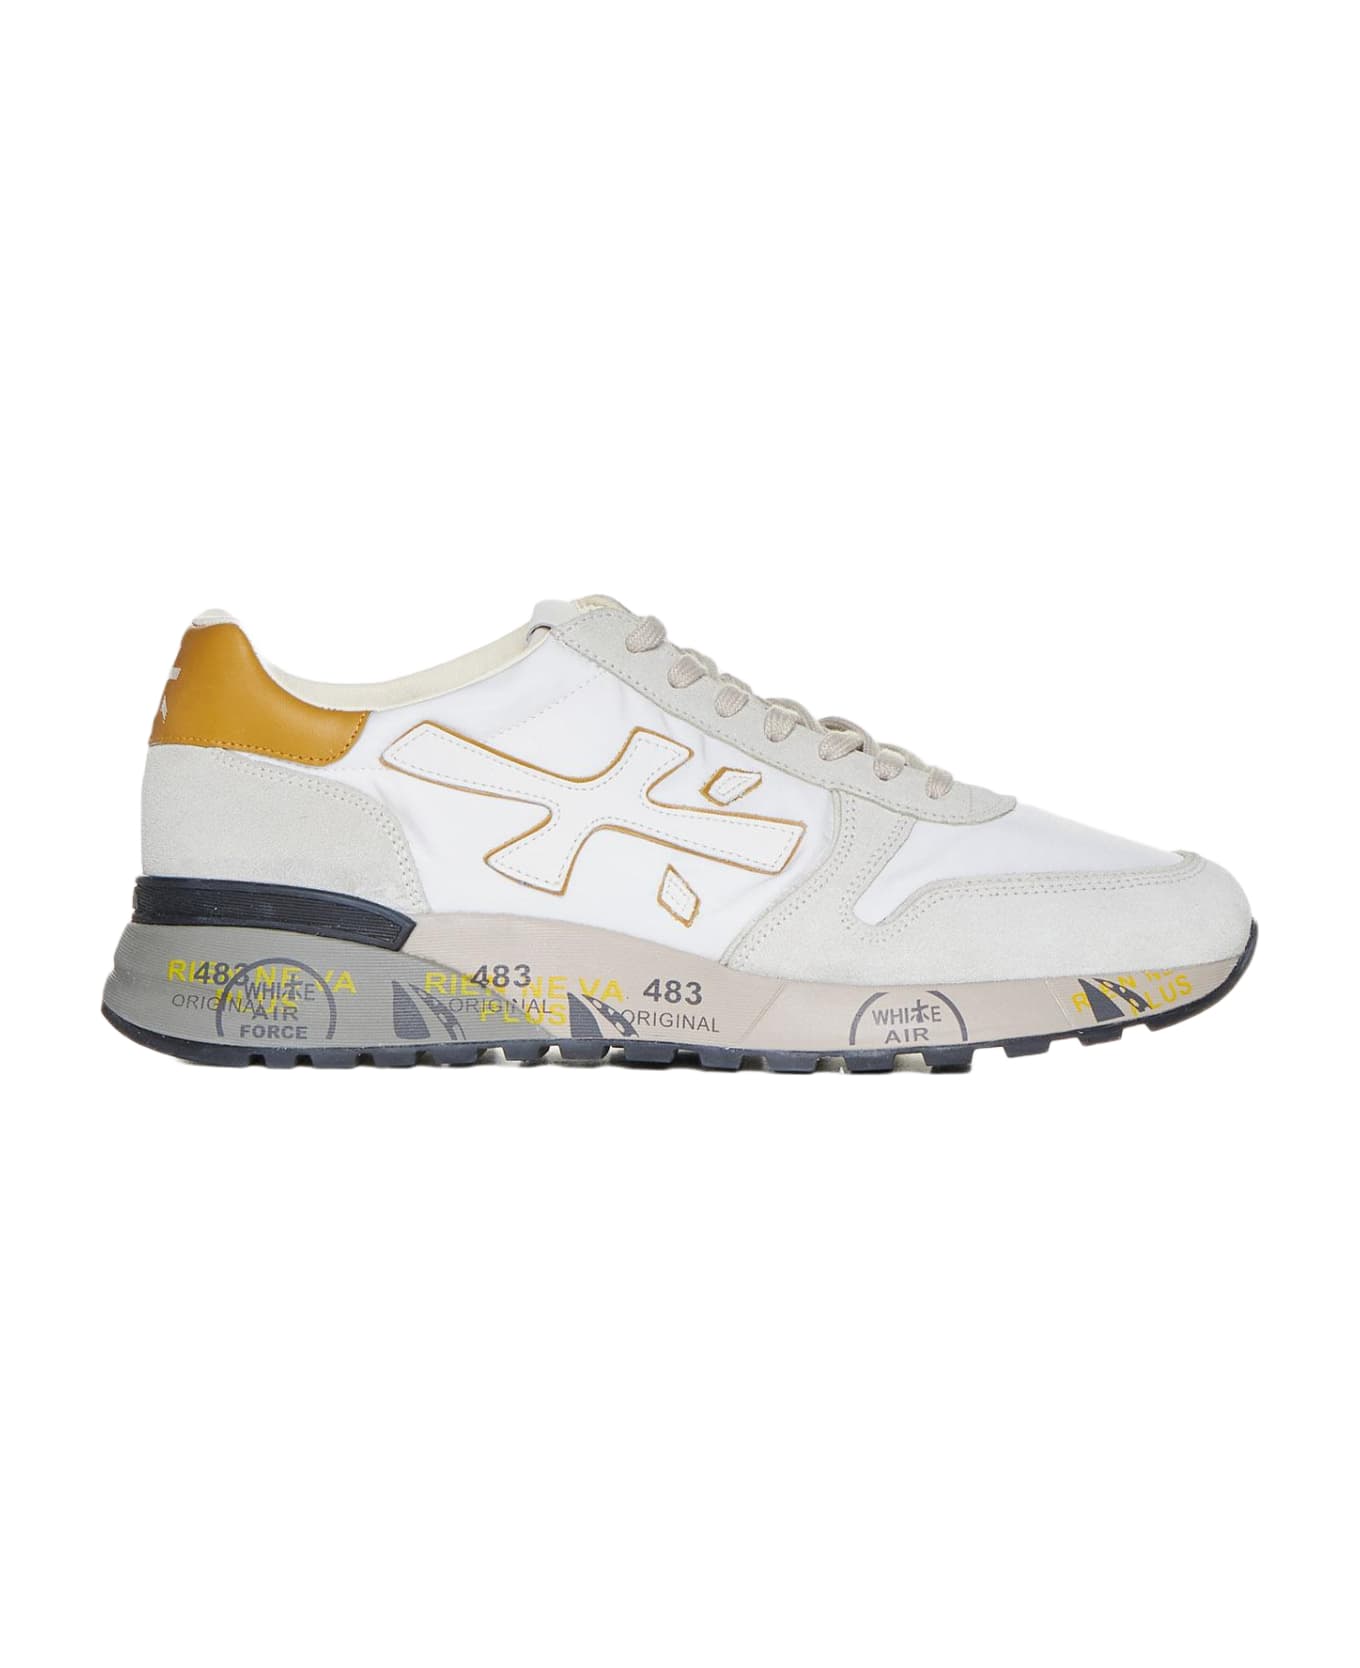 Premiata Mick Suede, Nylon And Leather Sneakers